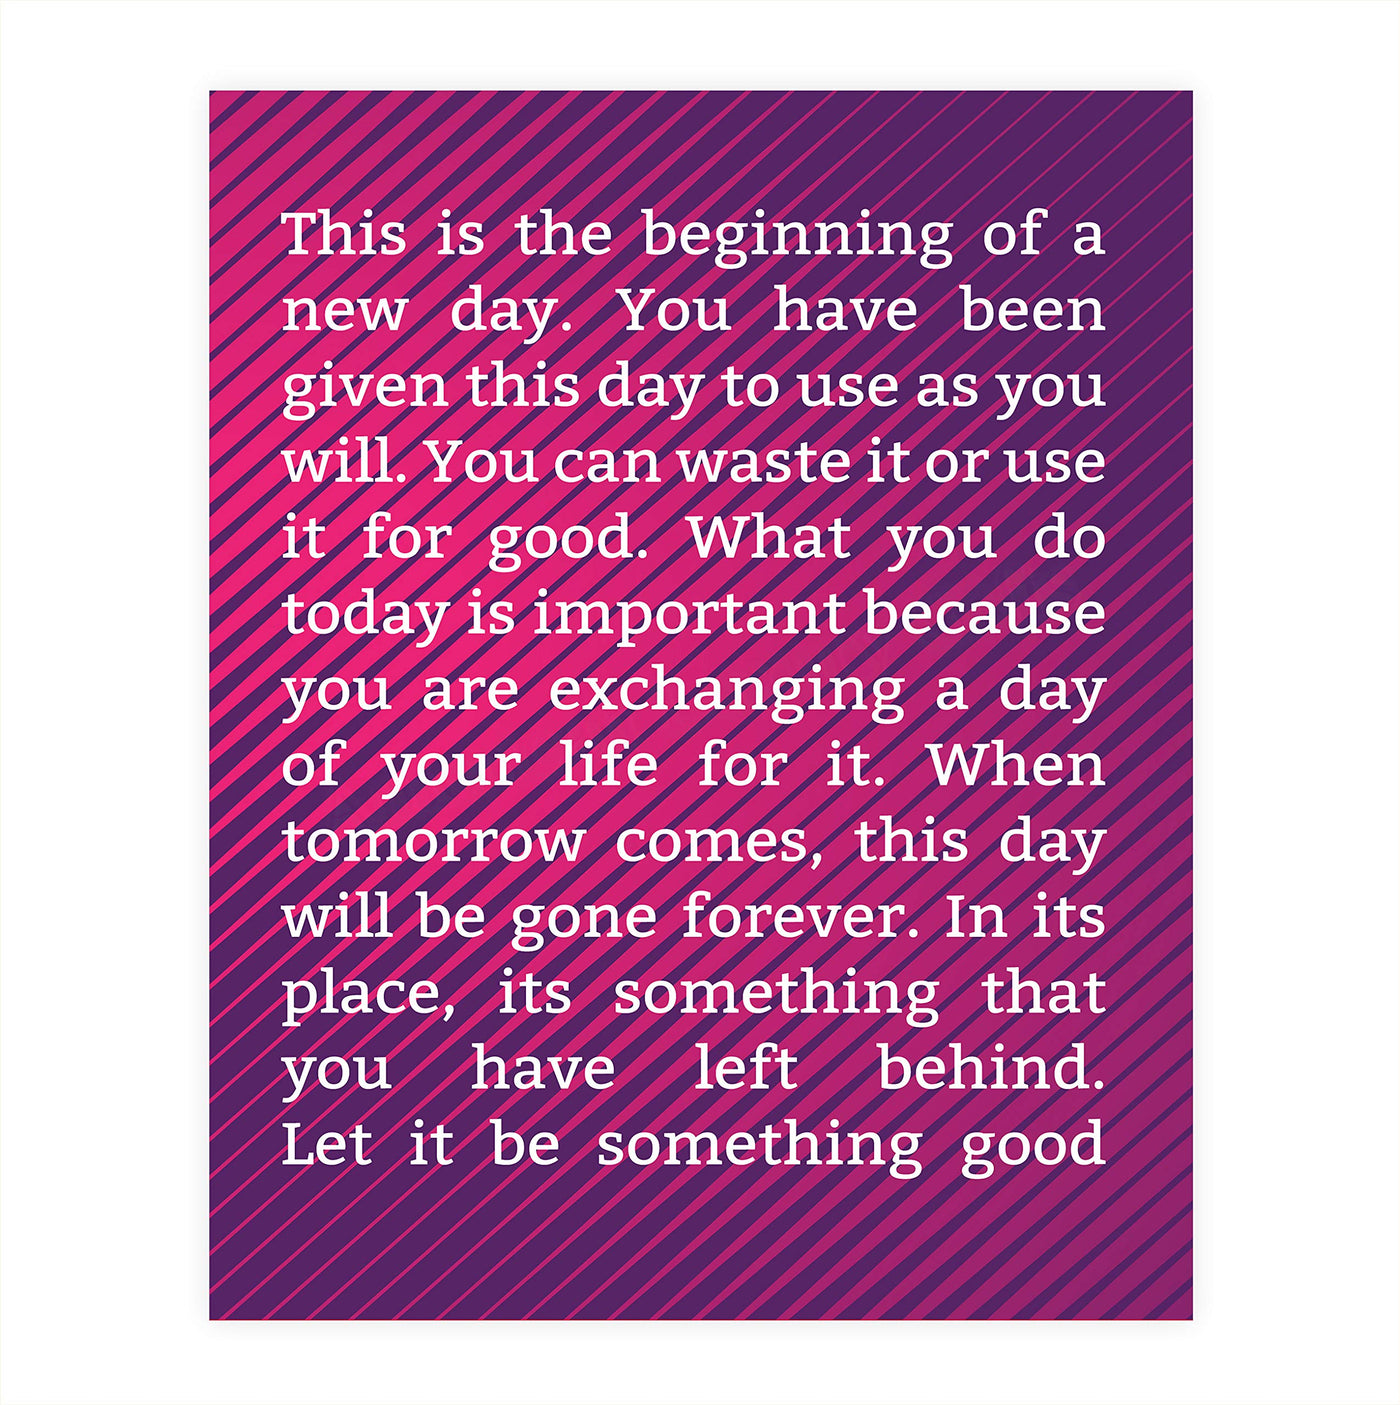 Beginning a New Day-Make It Something Good!-8 x 10" Inspirational Poster Print. Motivational Wall Art-Ready to Frame. Ideal for Home-Office-School D?cor. Program Yourself to Win the Day! Great Gift!